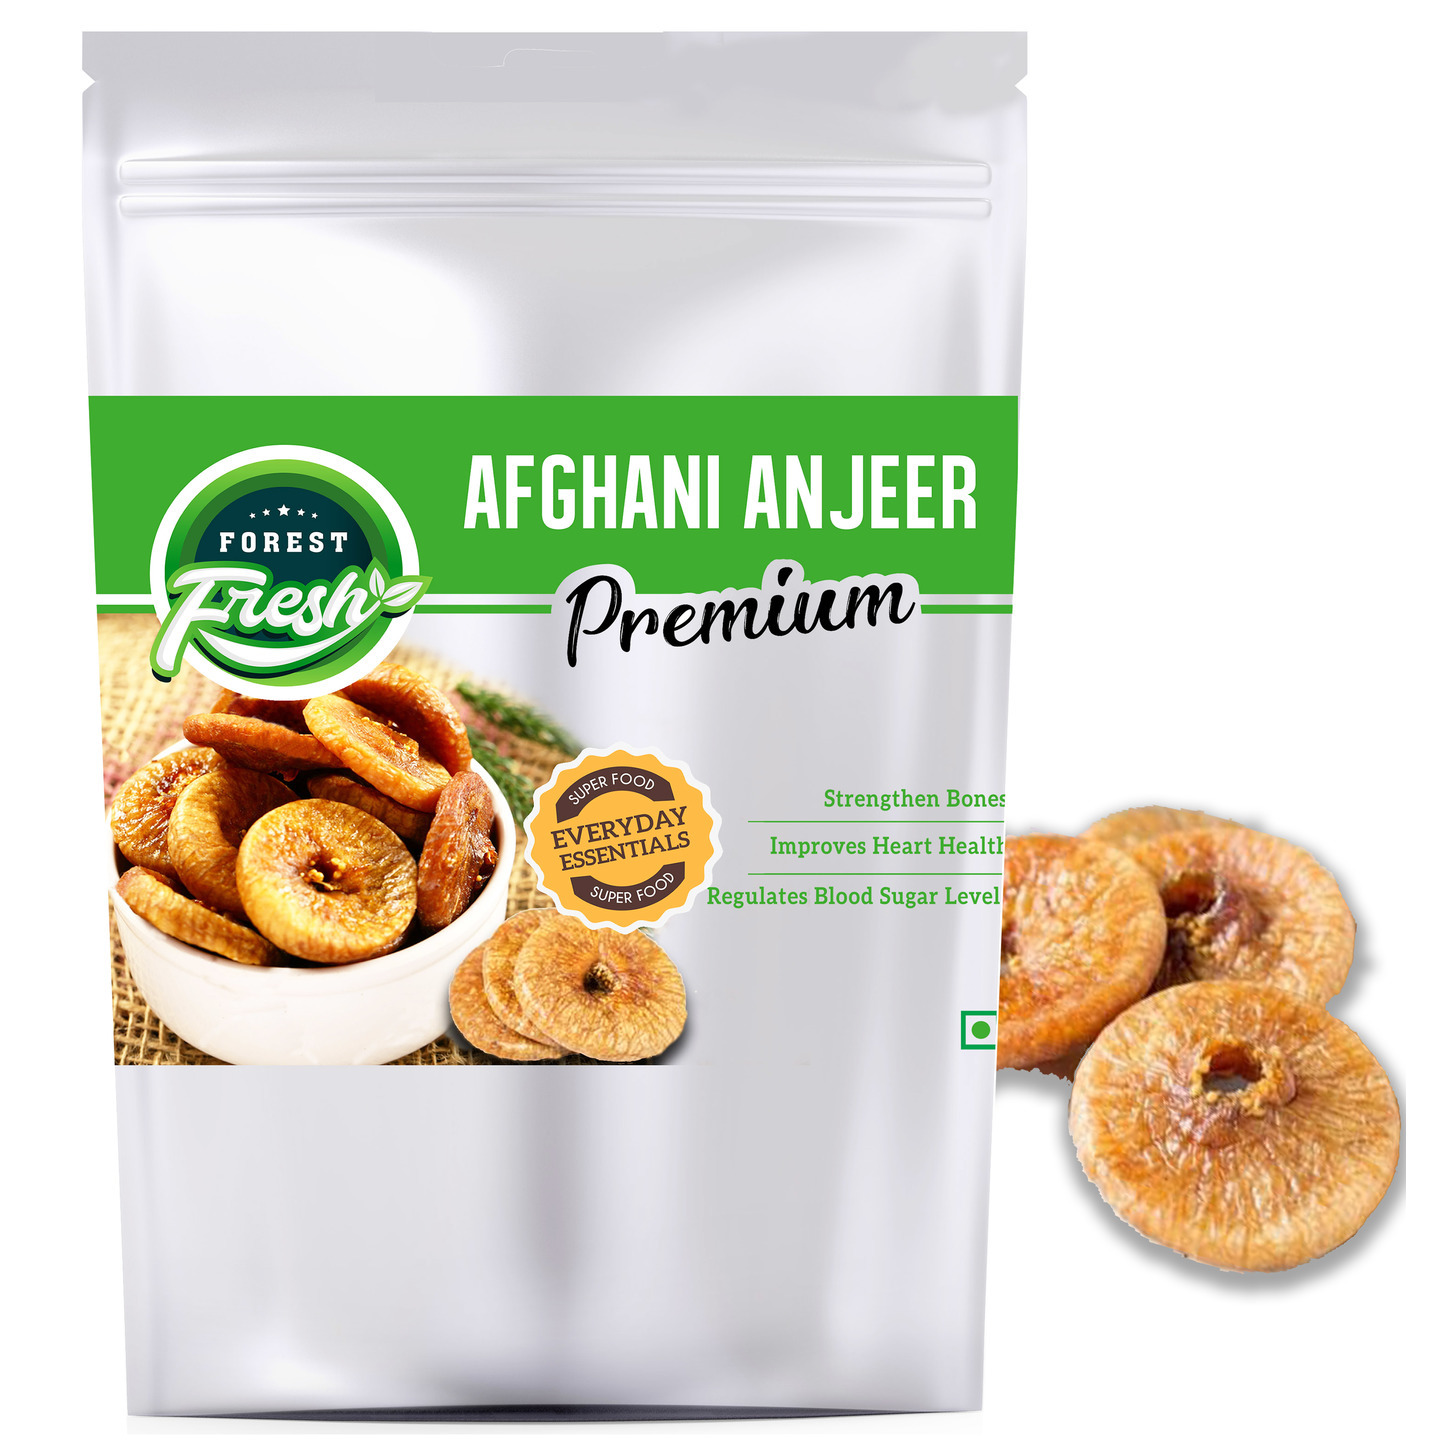 Forest Fresh Premium Afghani Anjeer (Dried Figs) - 900g - Everyday Essential Superfood - Dry Fruits & Nuts